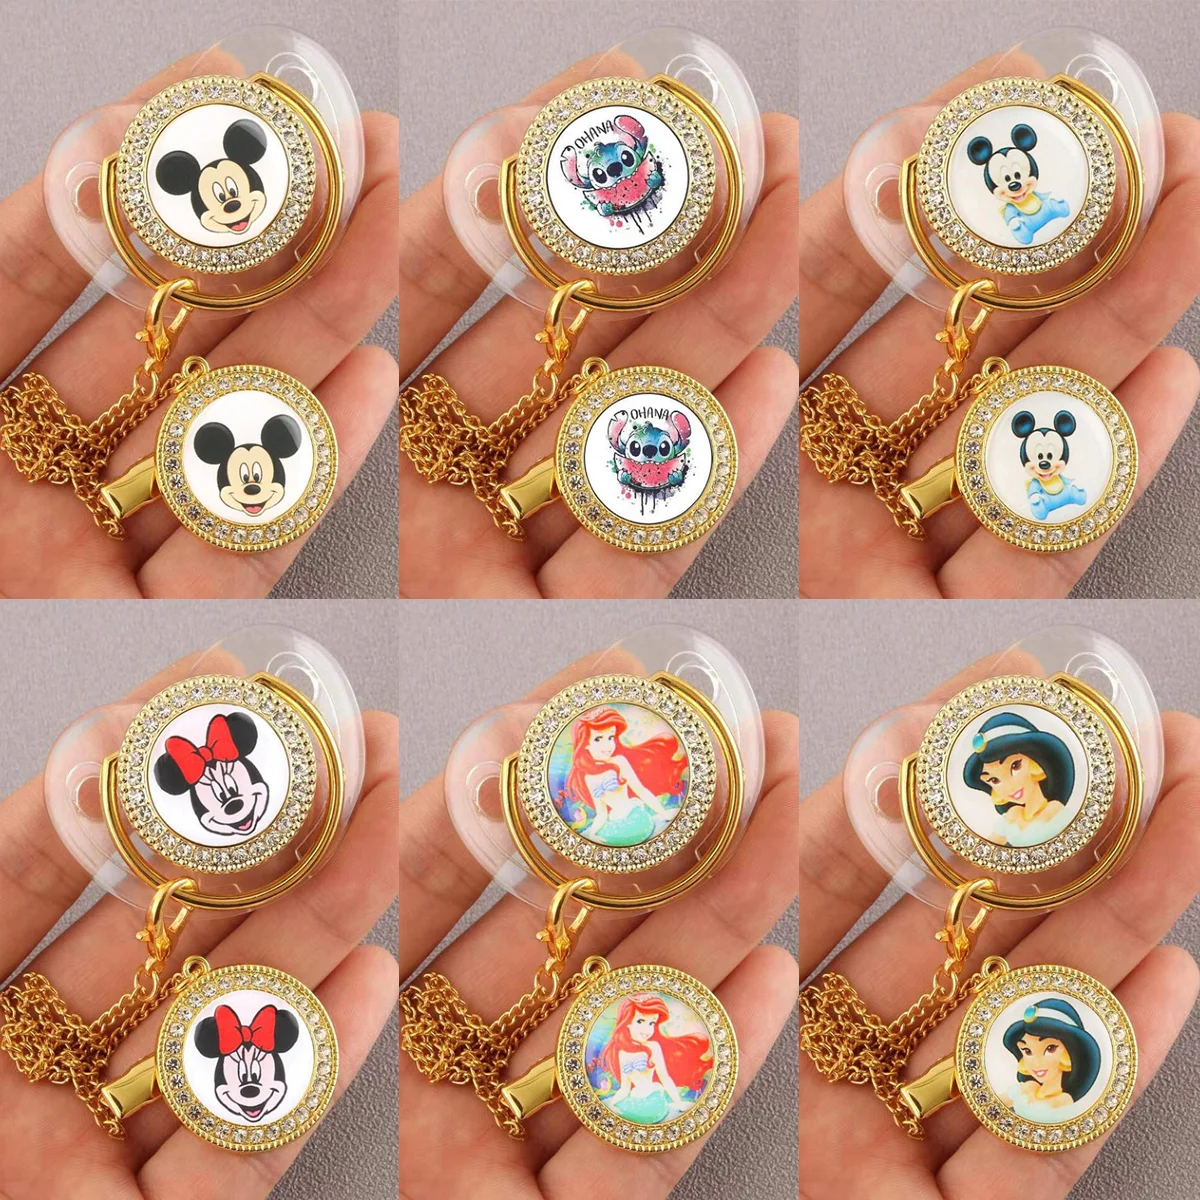 

2Pcs 0-12 Months Baby Pacifier Disney Mickey Mouse Cartoon Printing Transparent Luxury Golden Bling Dummy Soother Pacifier